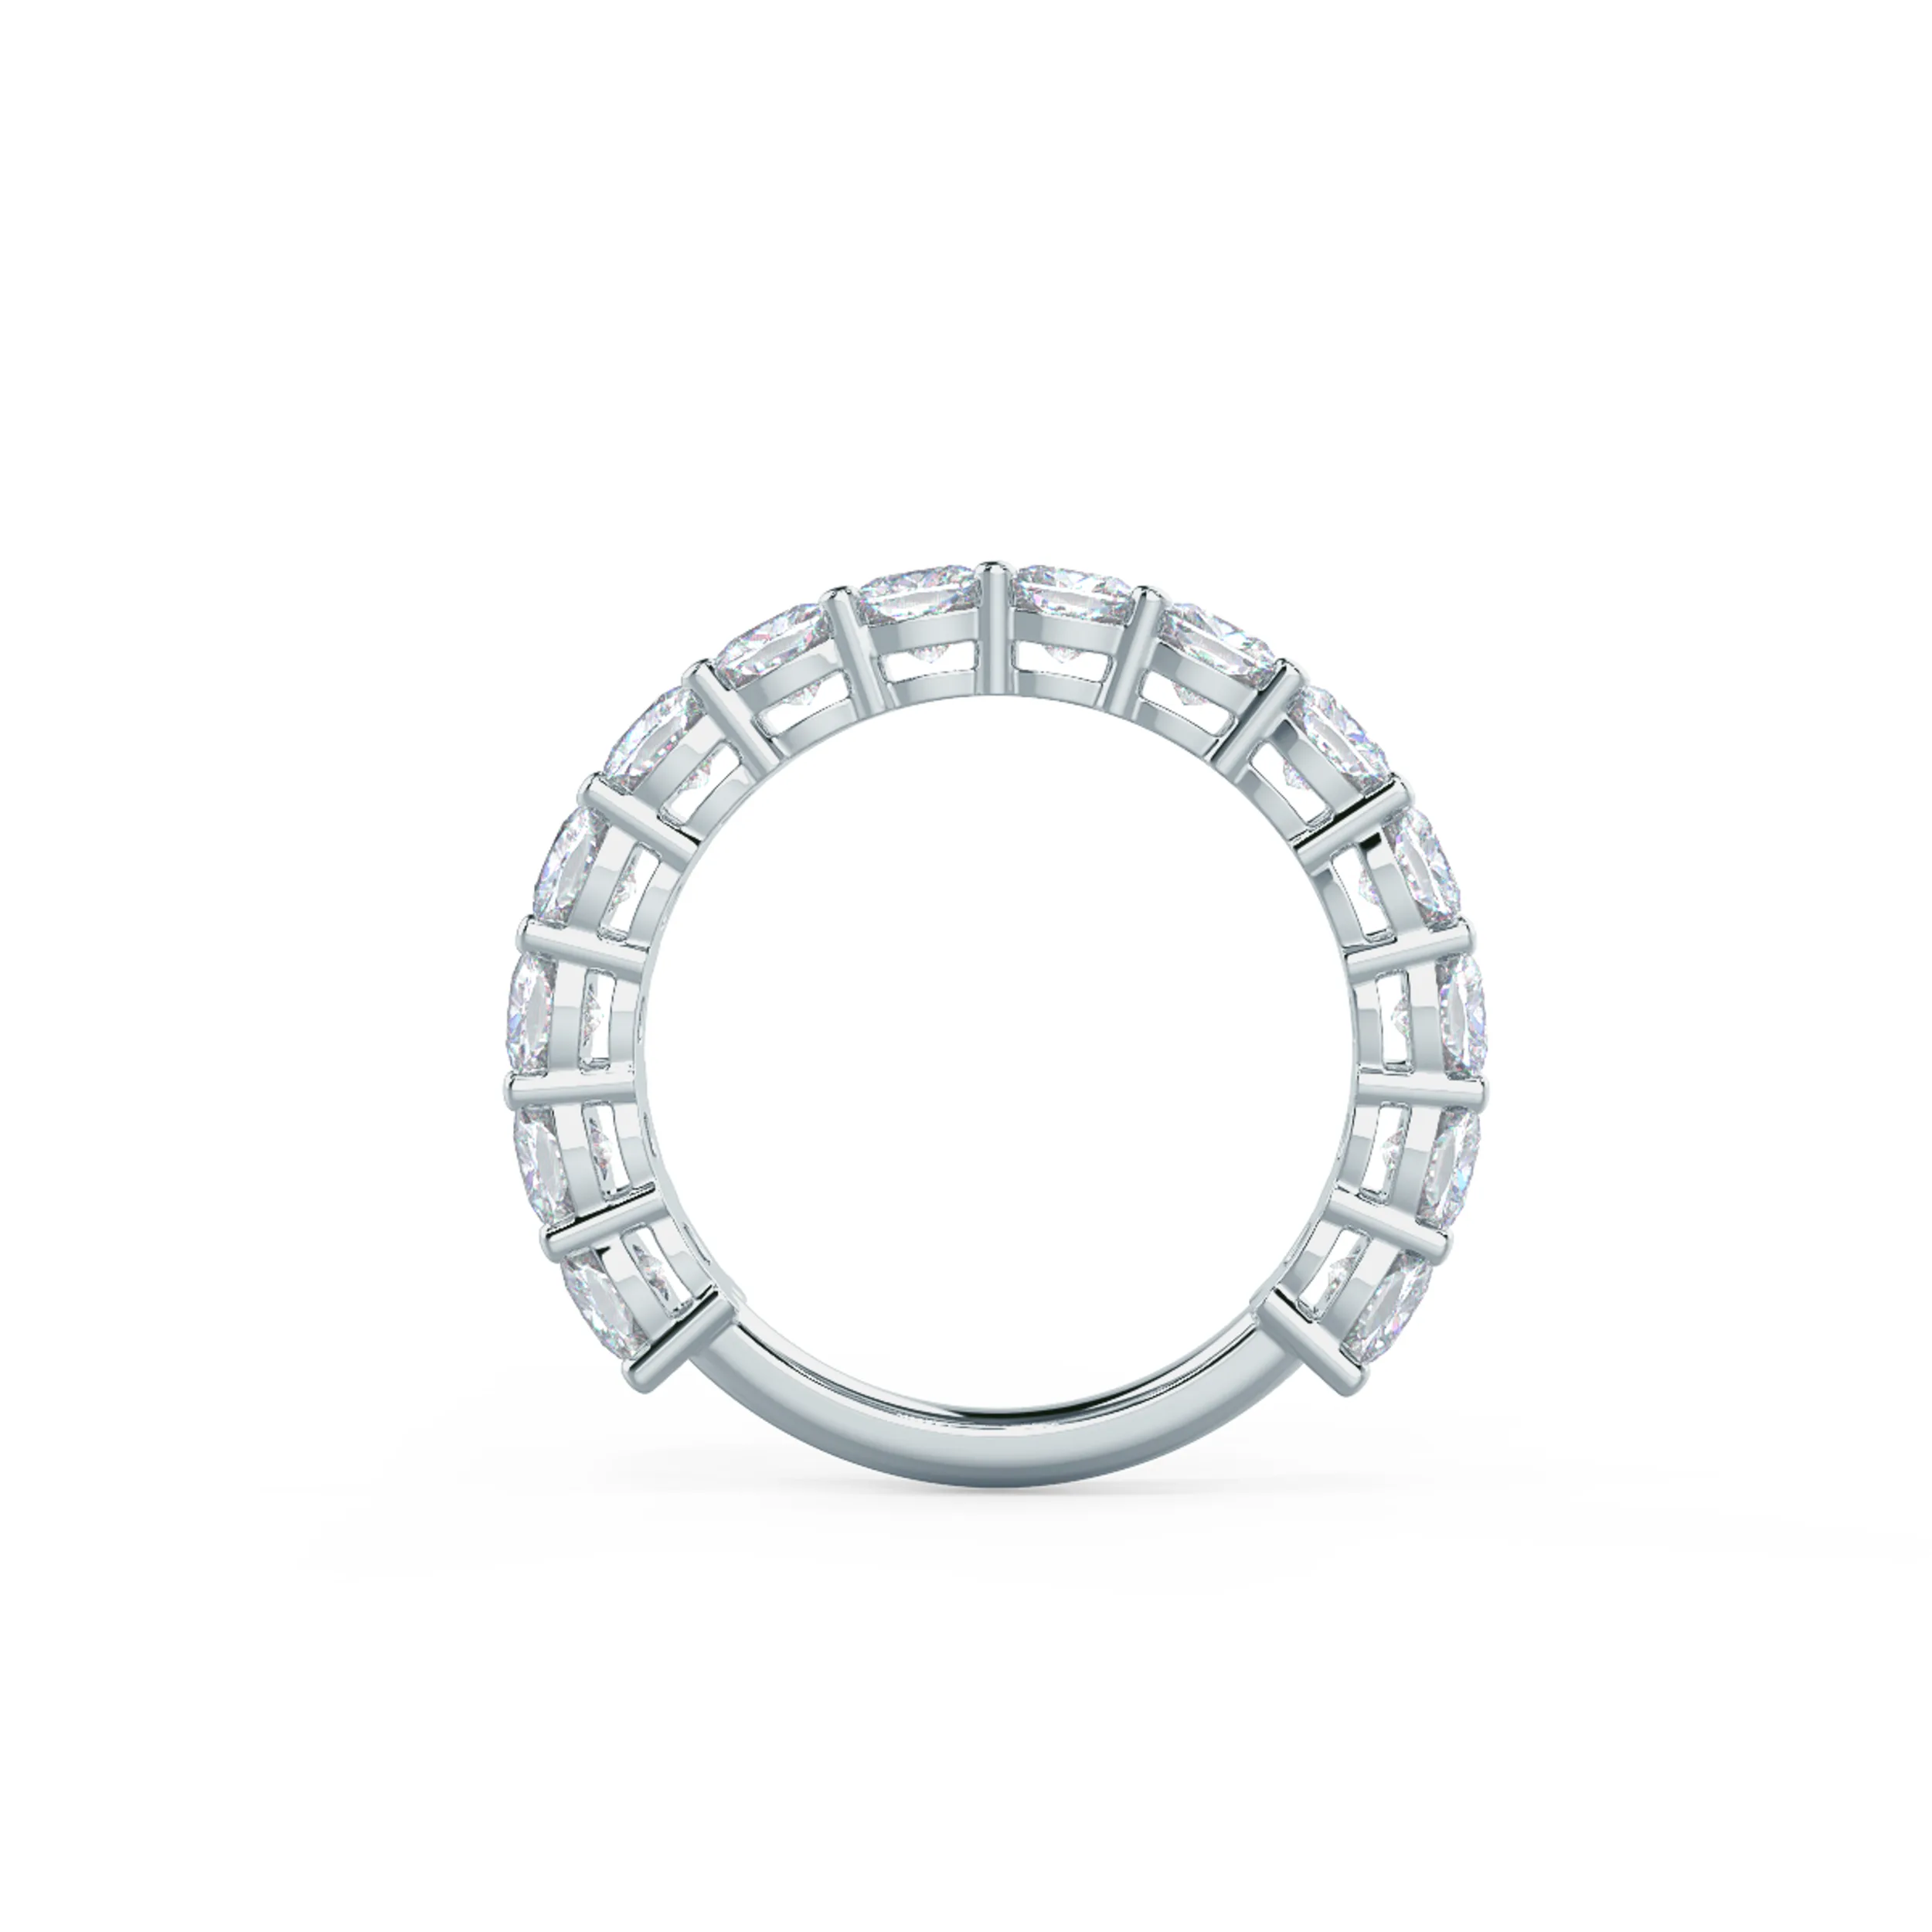 Exceptional Quality 3.5 Carat Lab Grown Diamonds Cushion Three Quarter Band in 18k White Gold (Profile View)